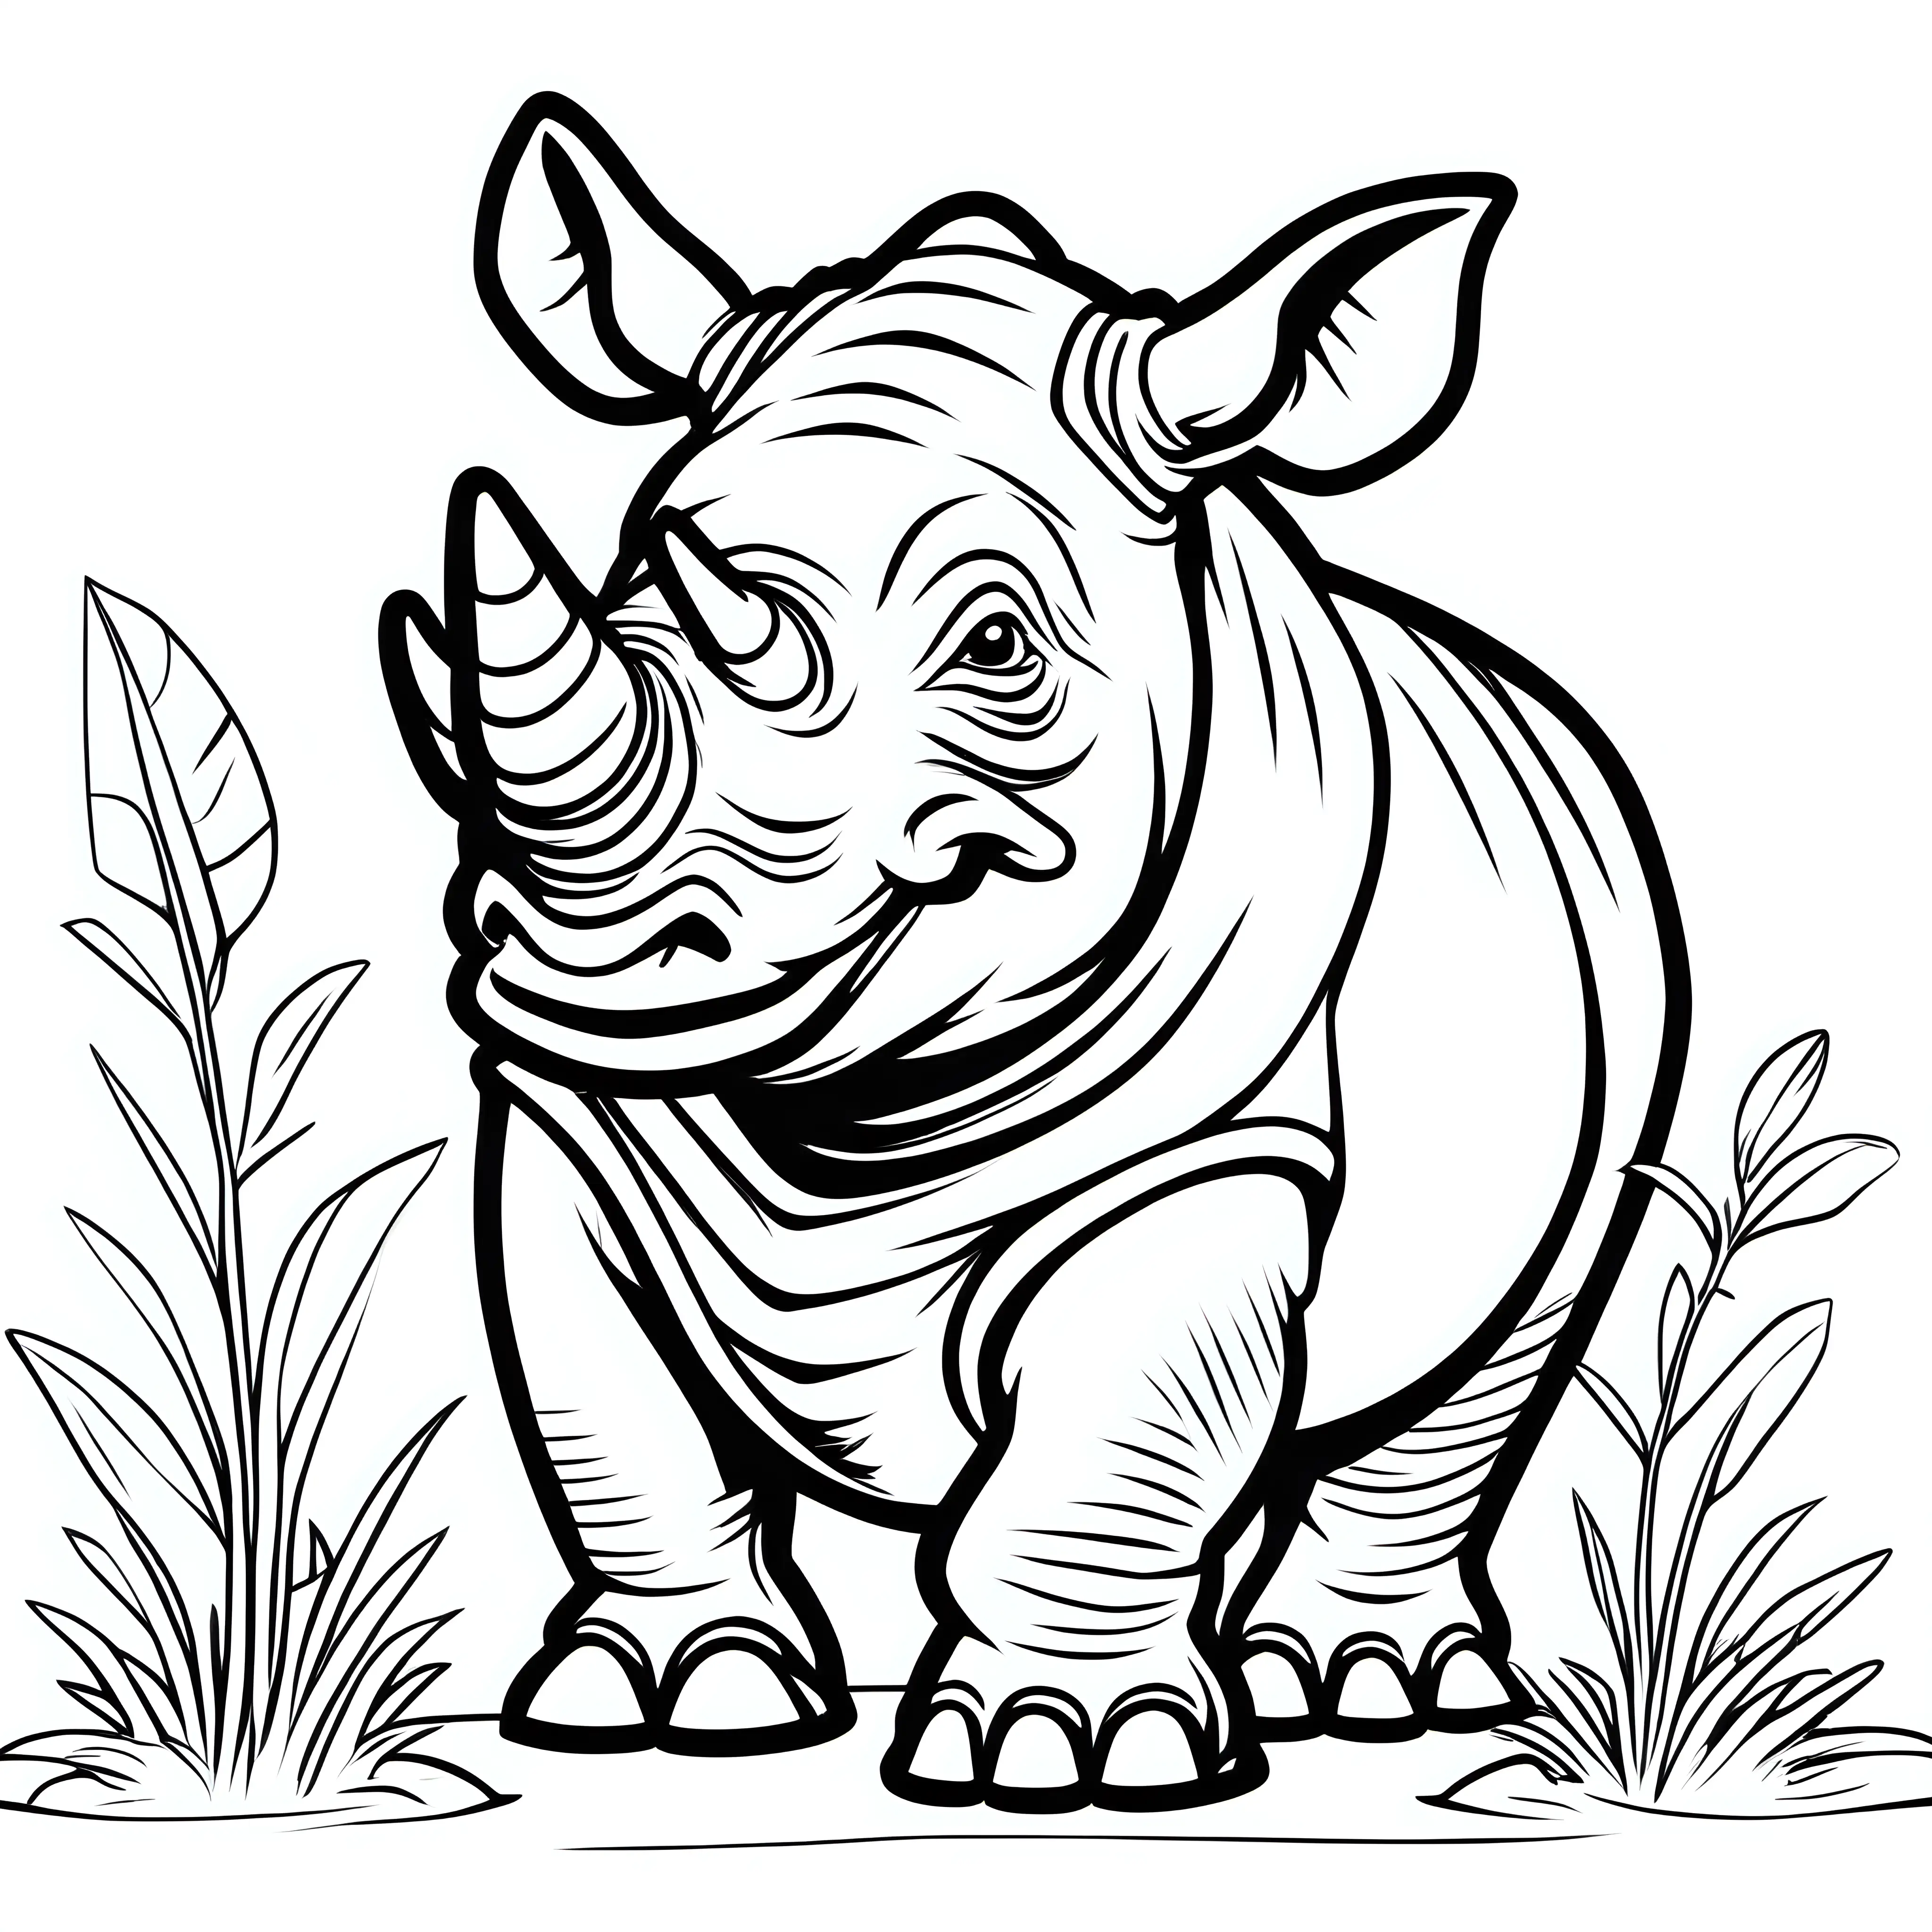 Cartoon Rhino Coloring Page for Kids